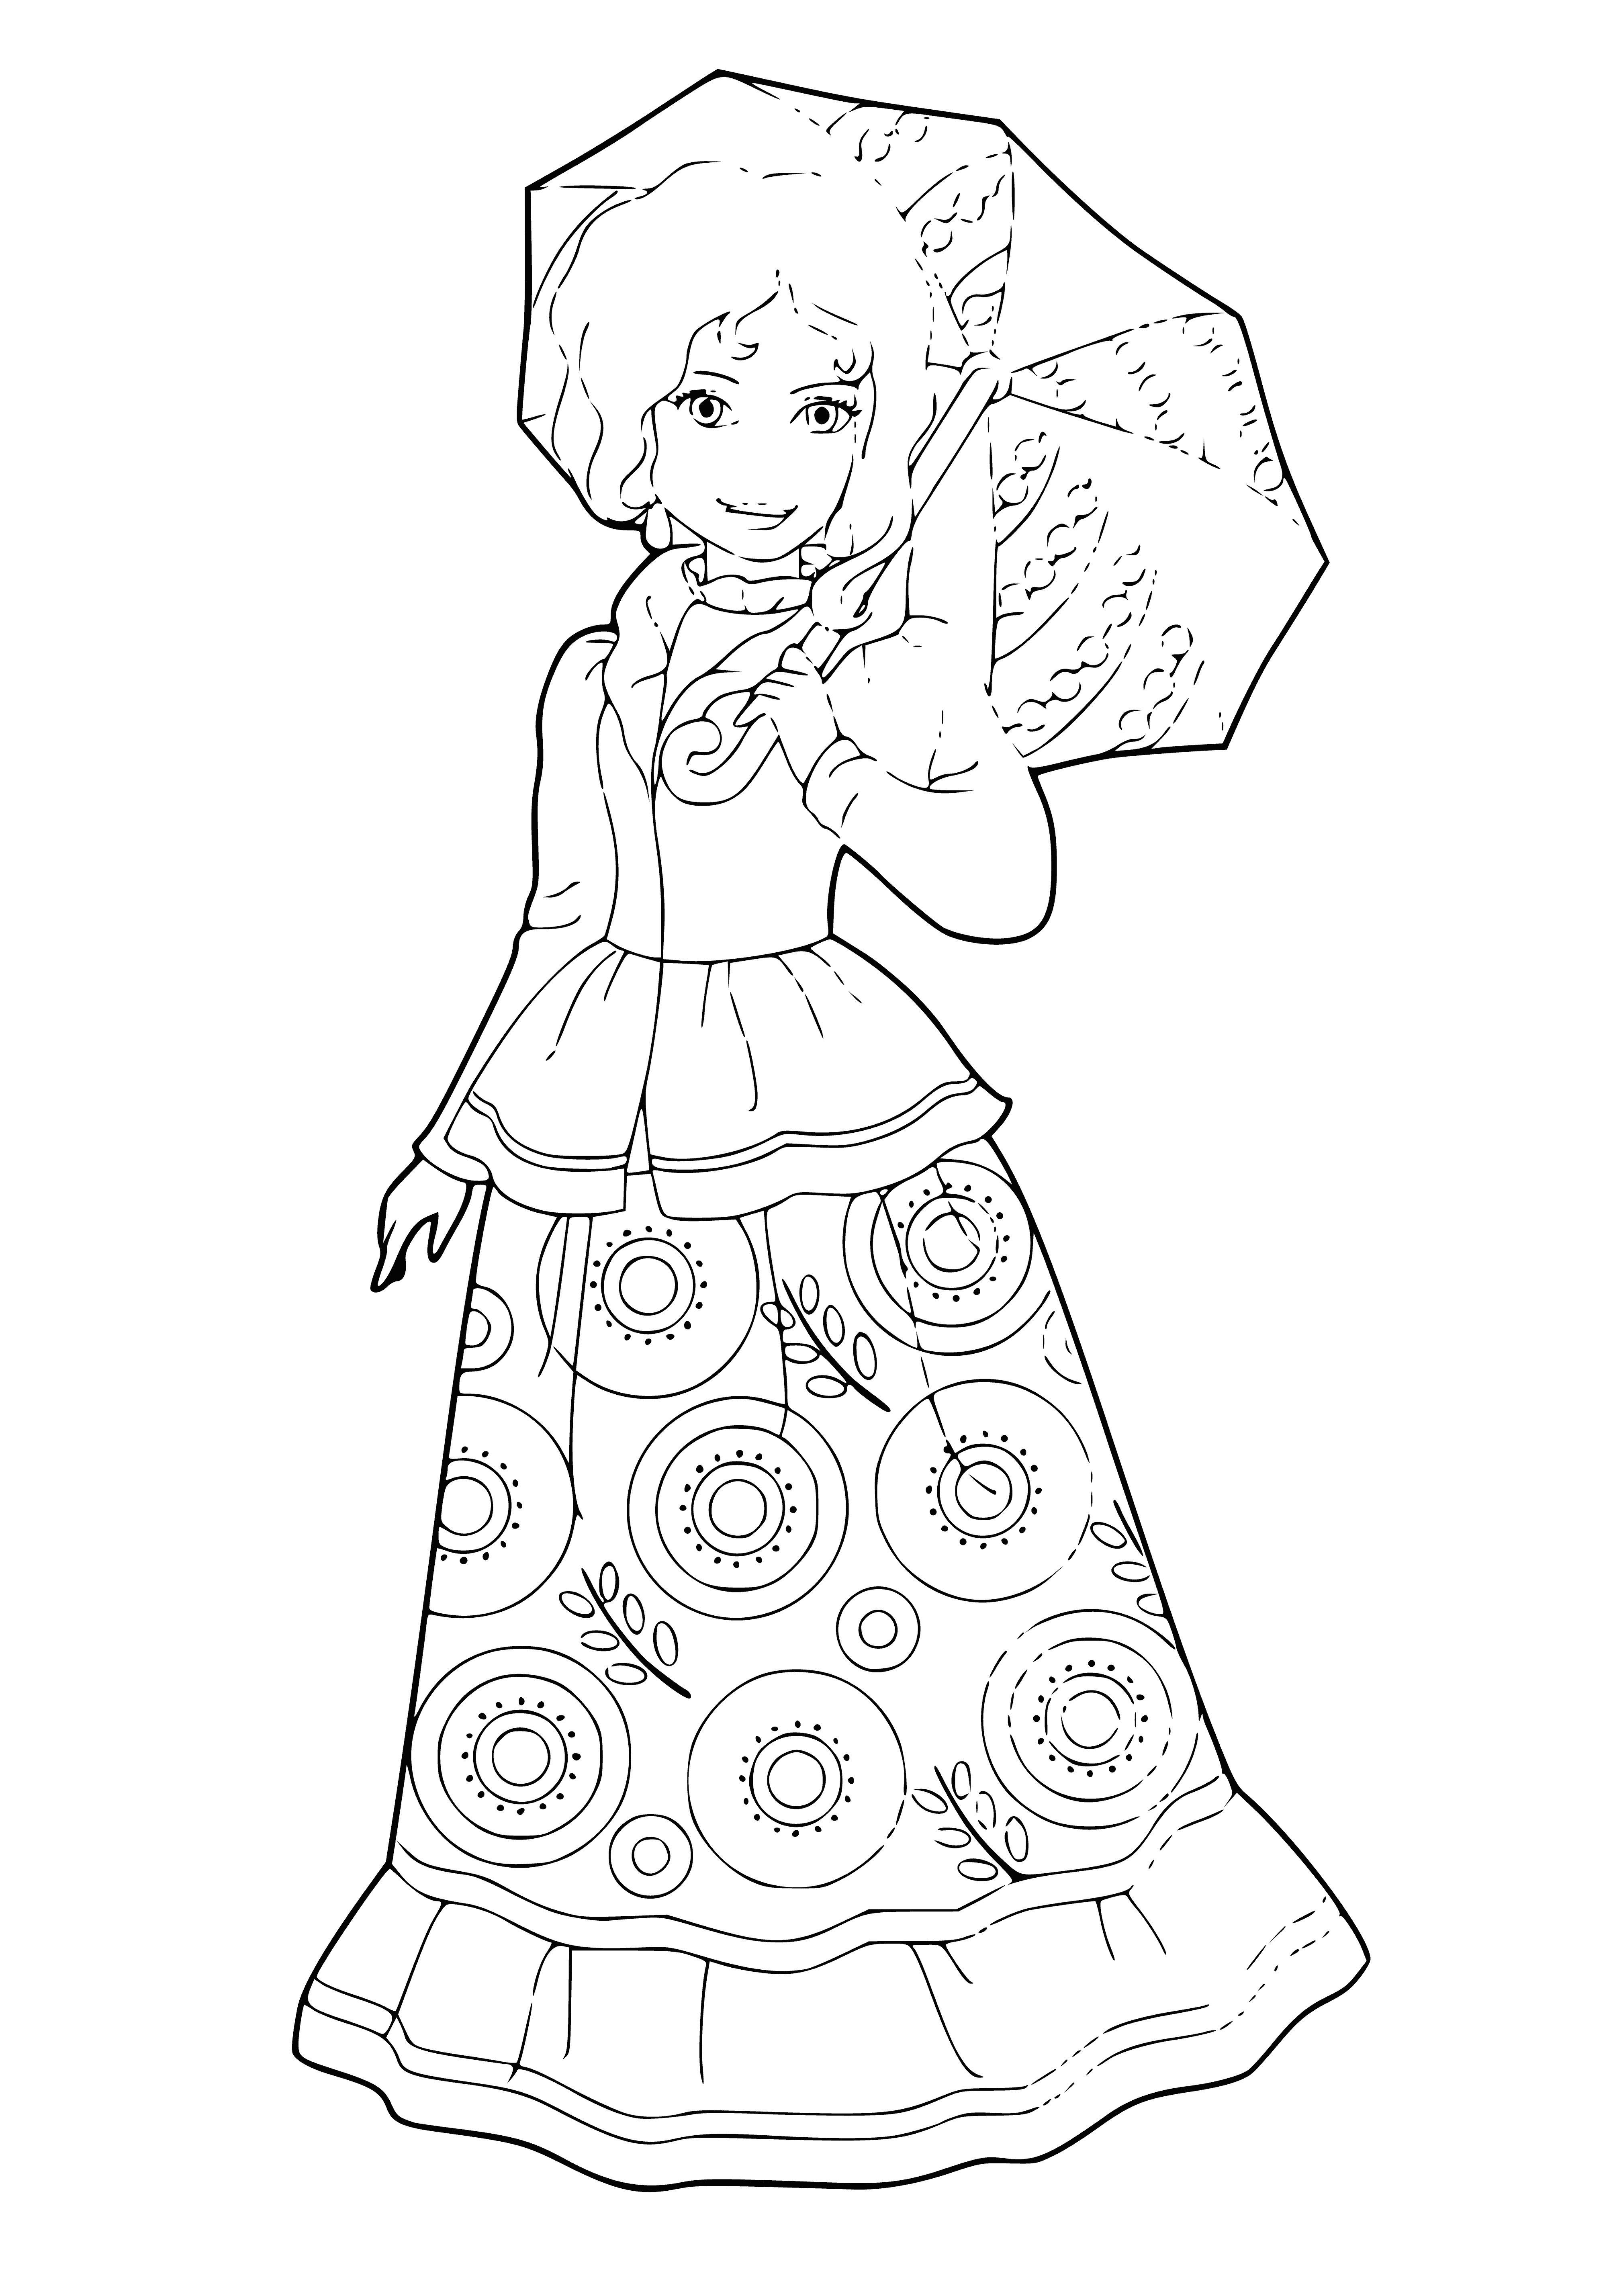 coloring page: A confident woman in a flowing dress stands under an umbrella, her hair blowing in the wind.